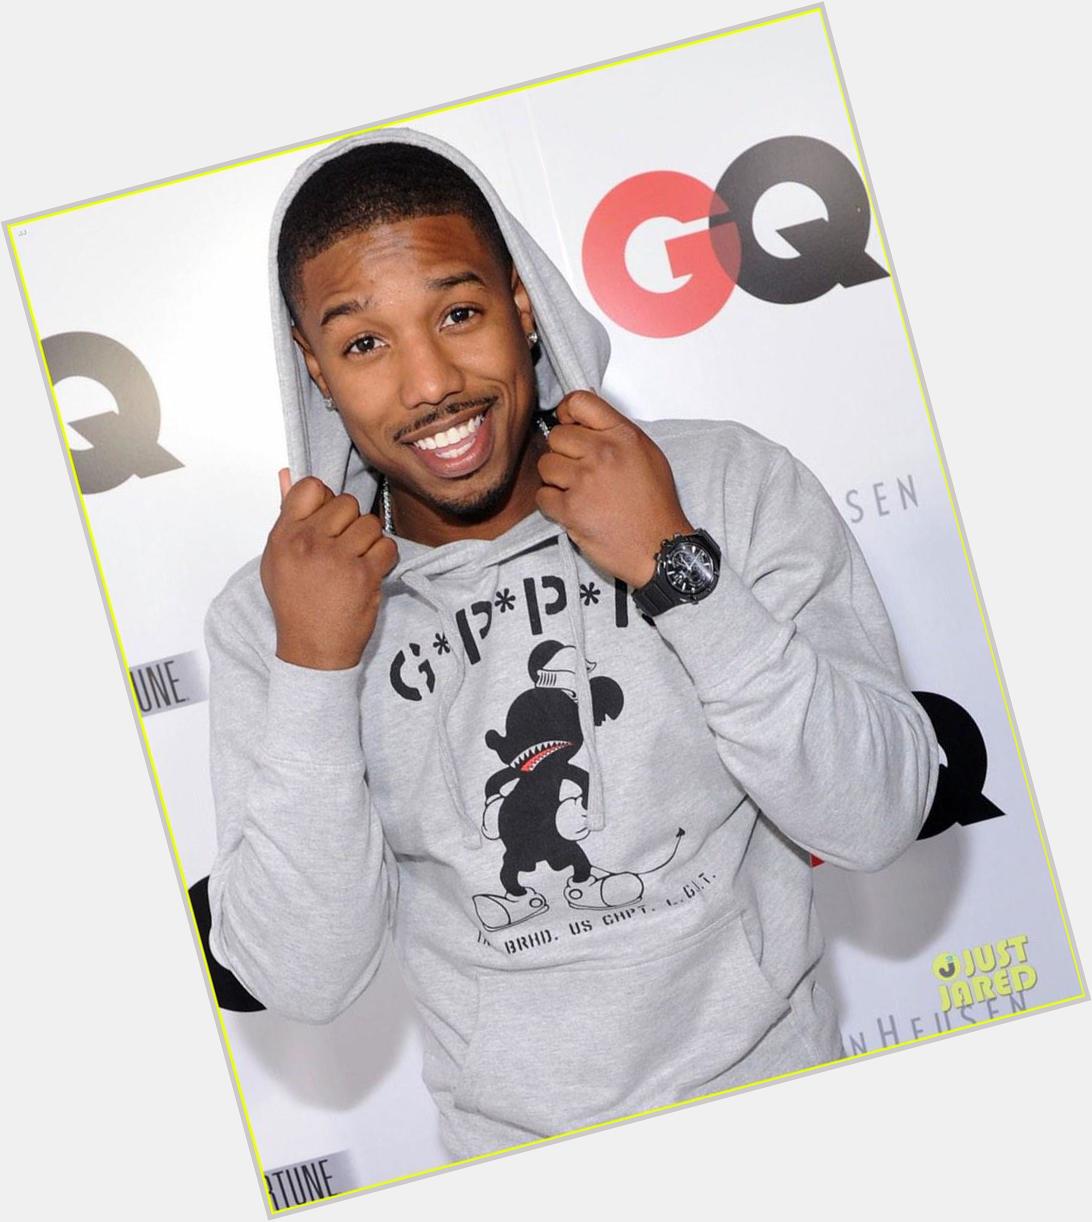 Happy birthday to the amazingly handsome and talented Michael B Jordan   